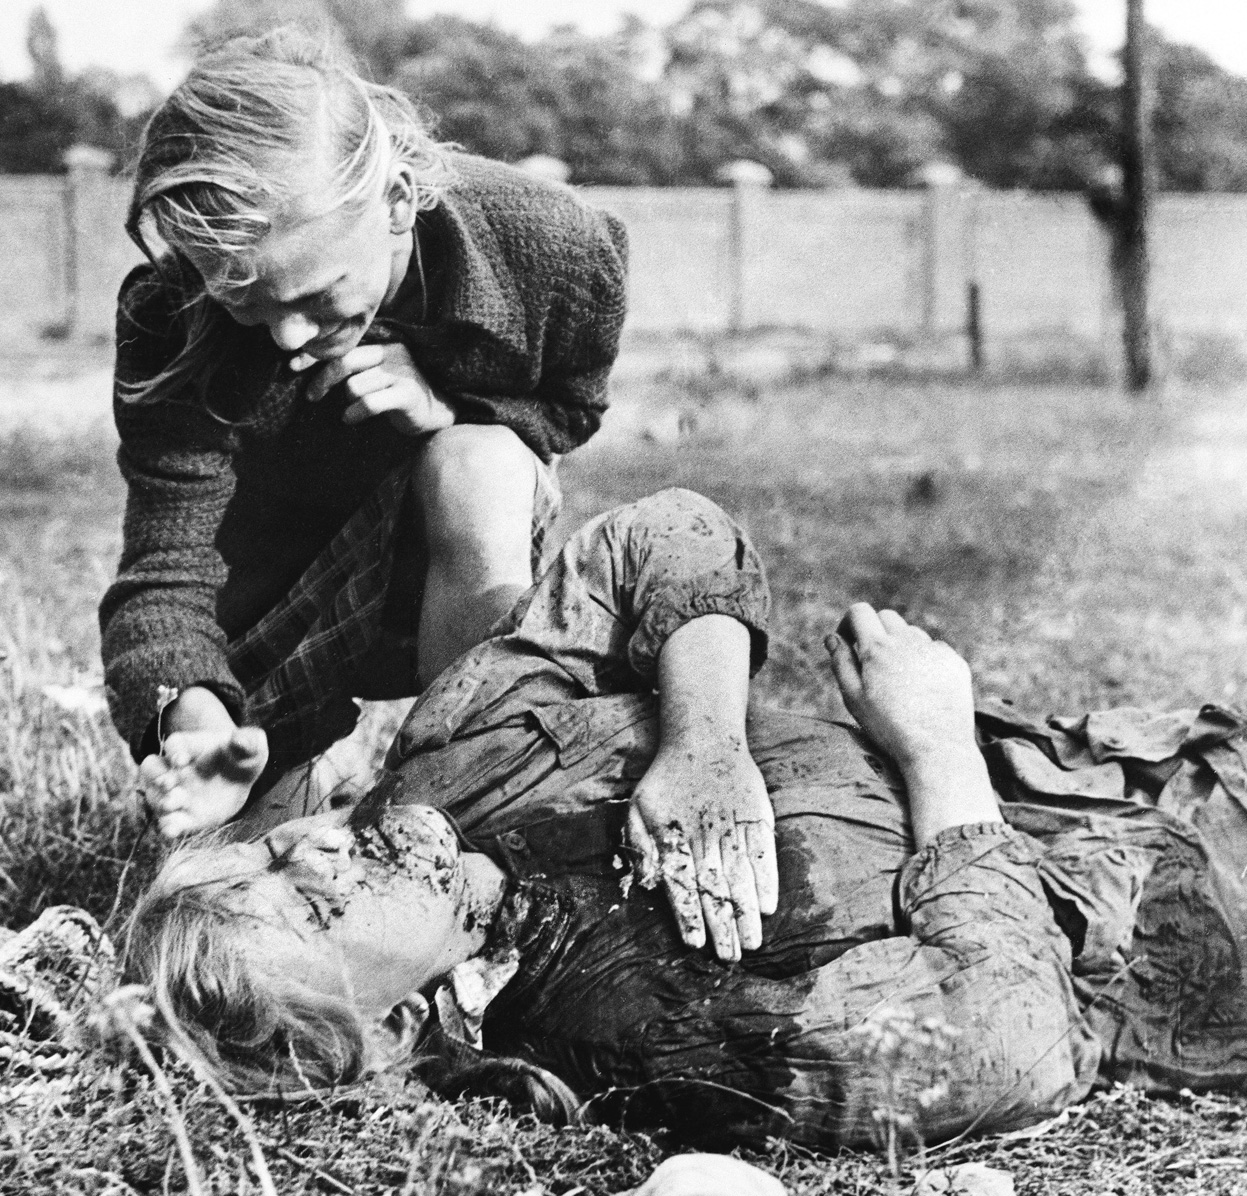 10-year old Kazimiera Mika crying for her sister killed by gun fire from a German plane near Warsaw, Sept. 1939 (Image: Julien Bryan)